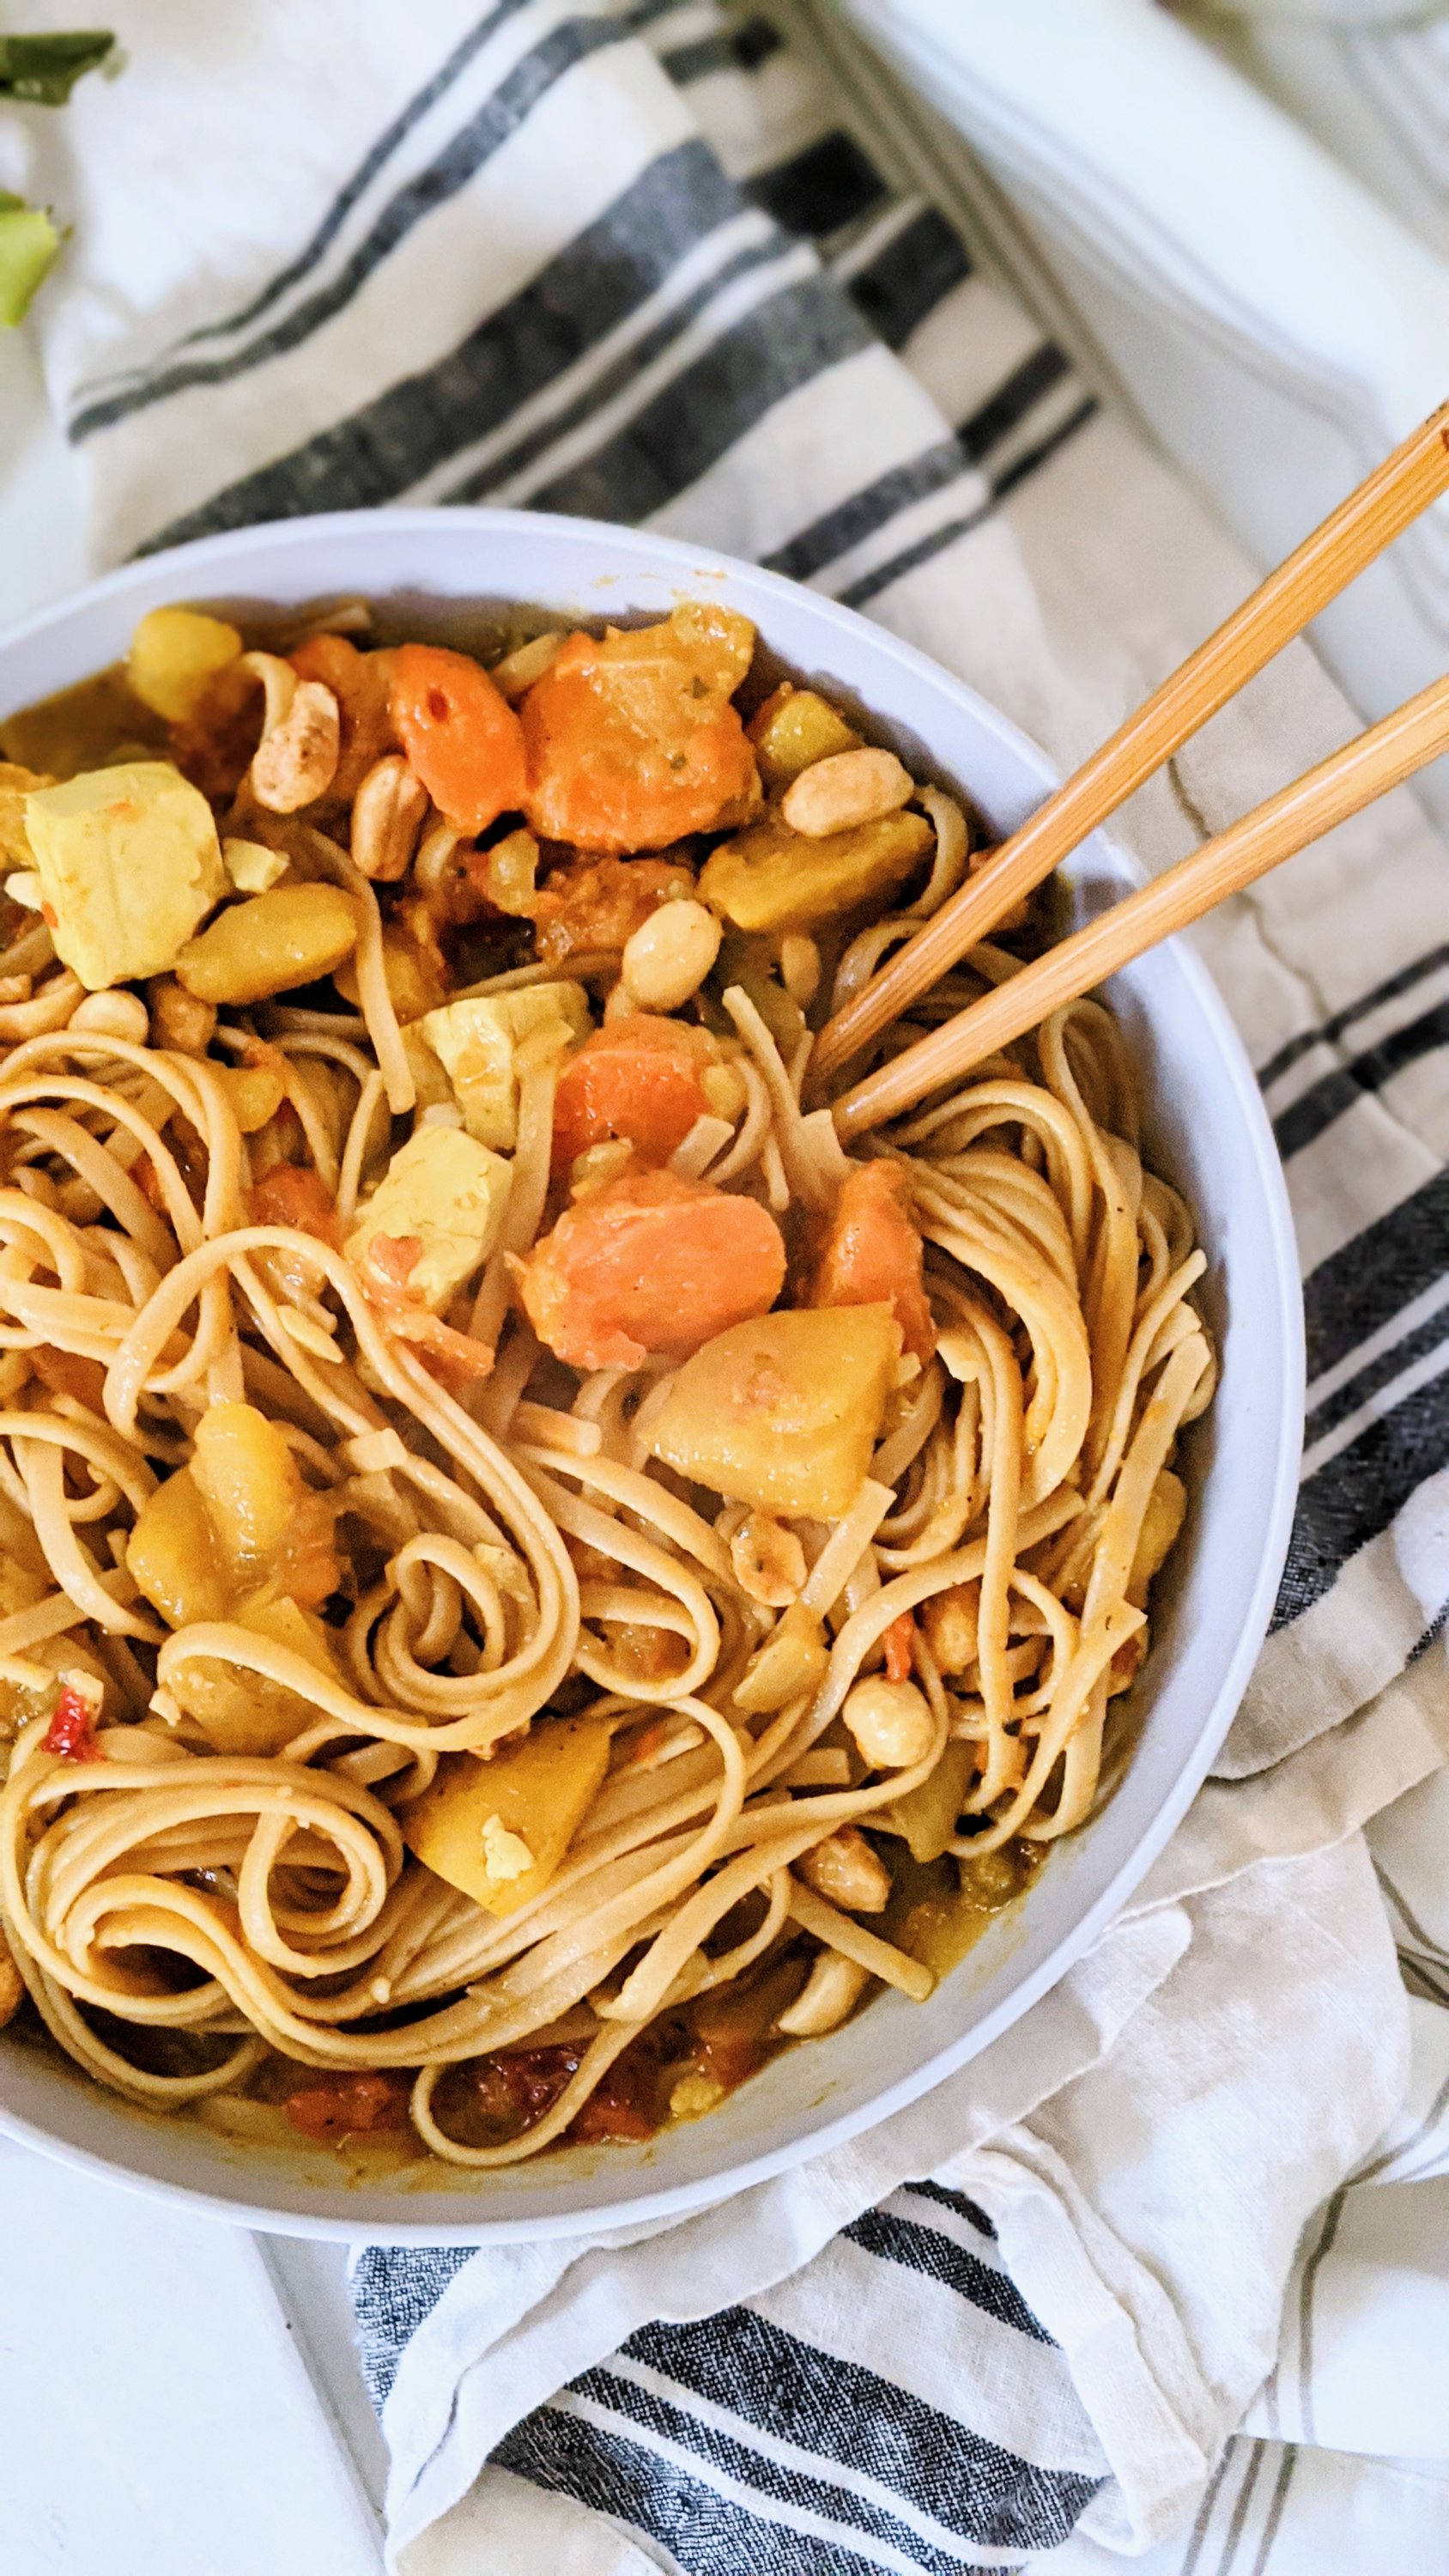 peanut curry pasta recipe peanut butter curry noodles with vegetable curry with peanut sauce vegan gluten free meatless thai noodle bowl recipe veggies